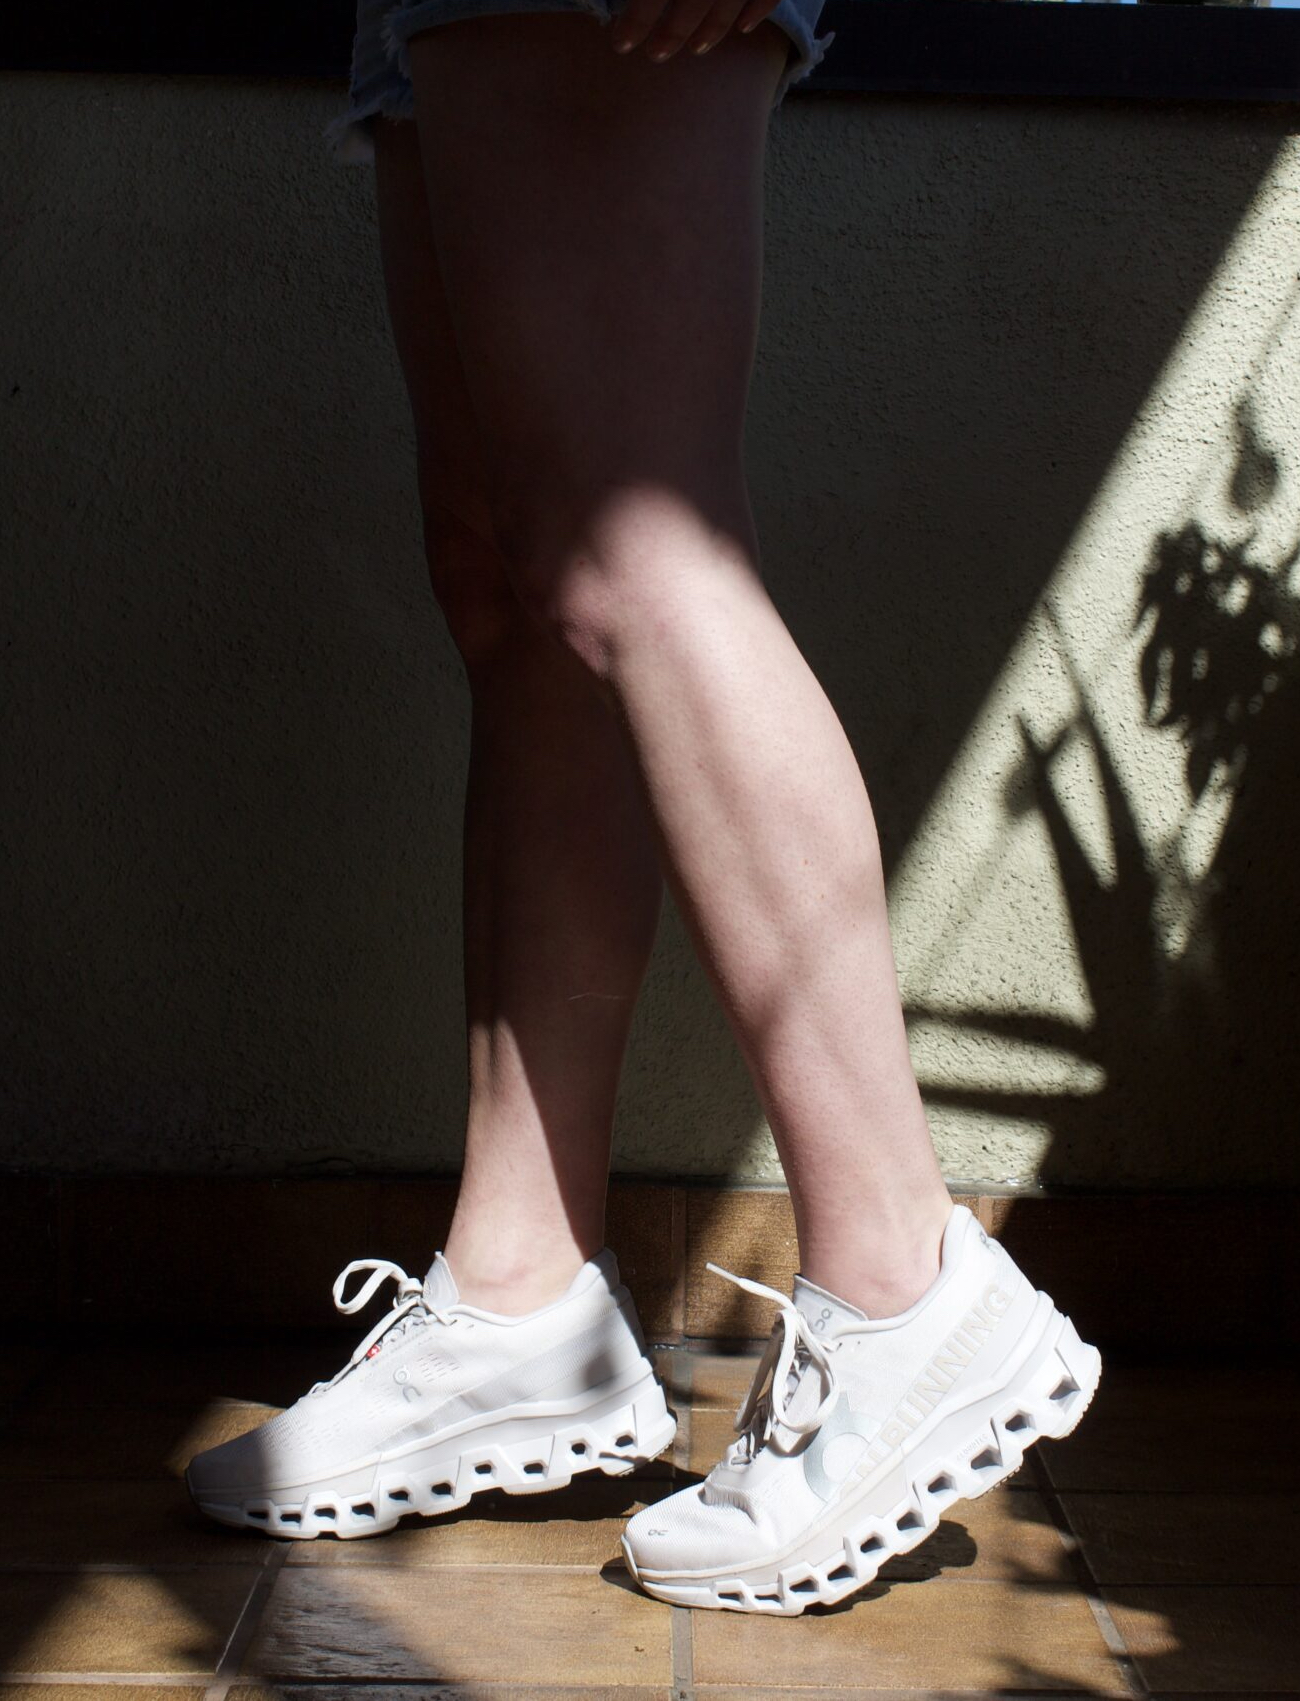 A person standing in sunlight, casting sharp shadows, wearing white sneakers and denim shorts, focused on legs.